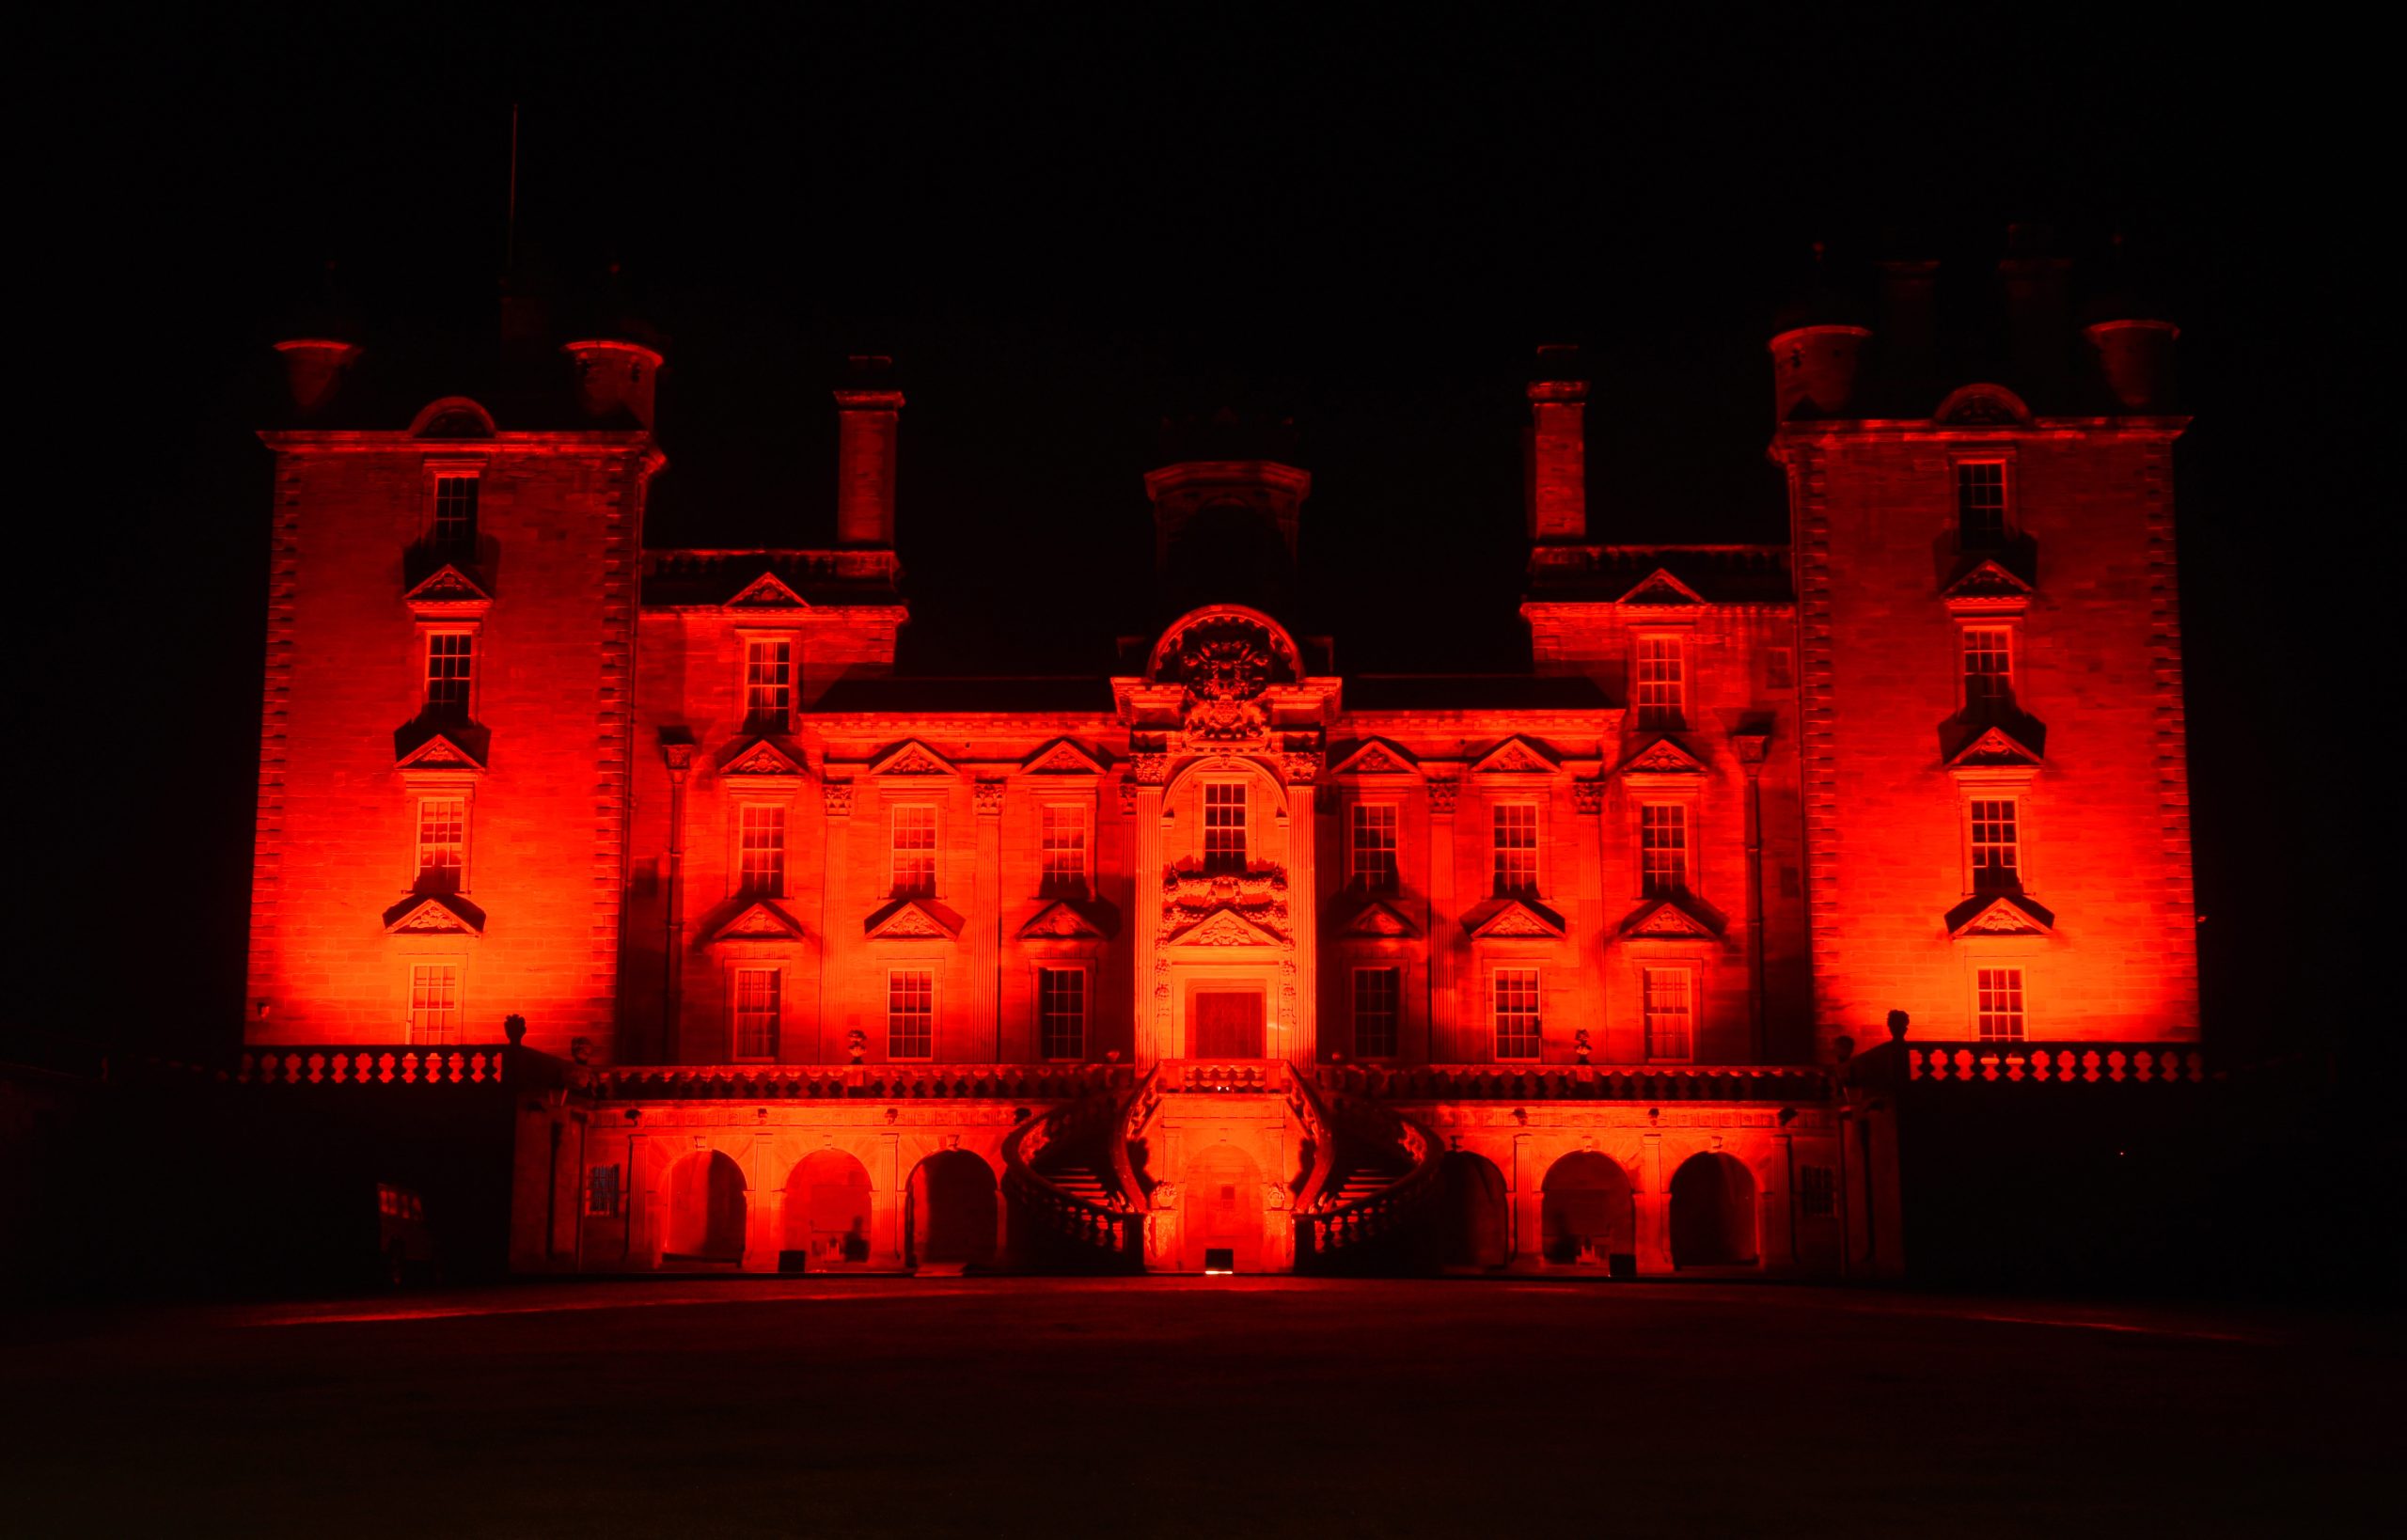 Scotland lights up red for charity